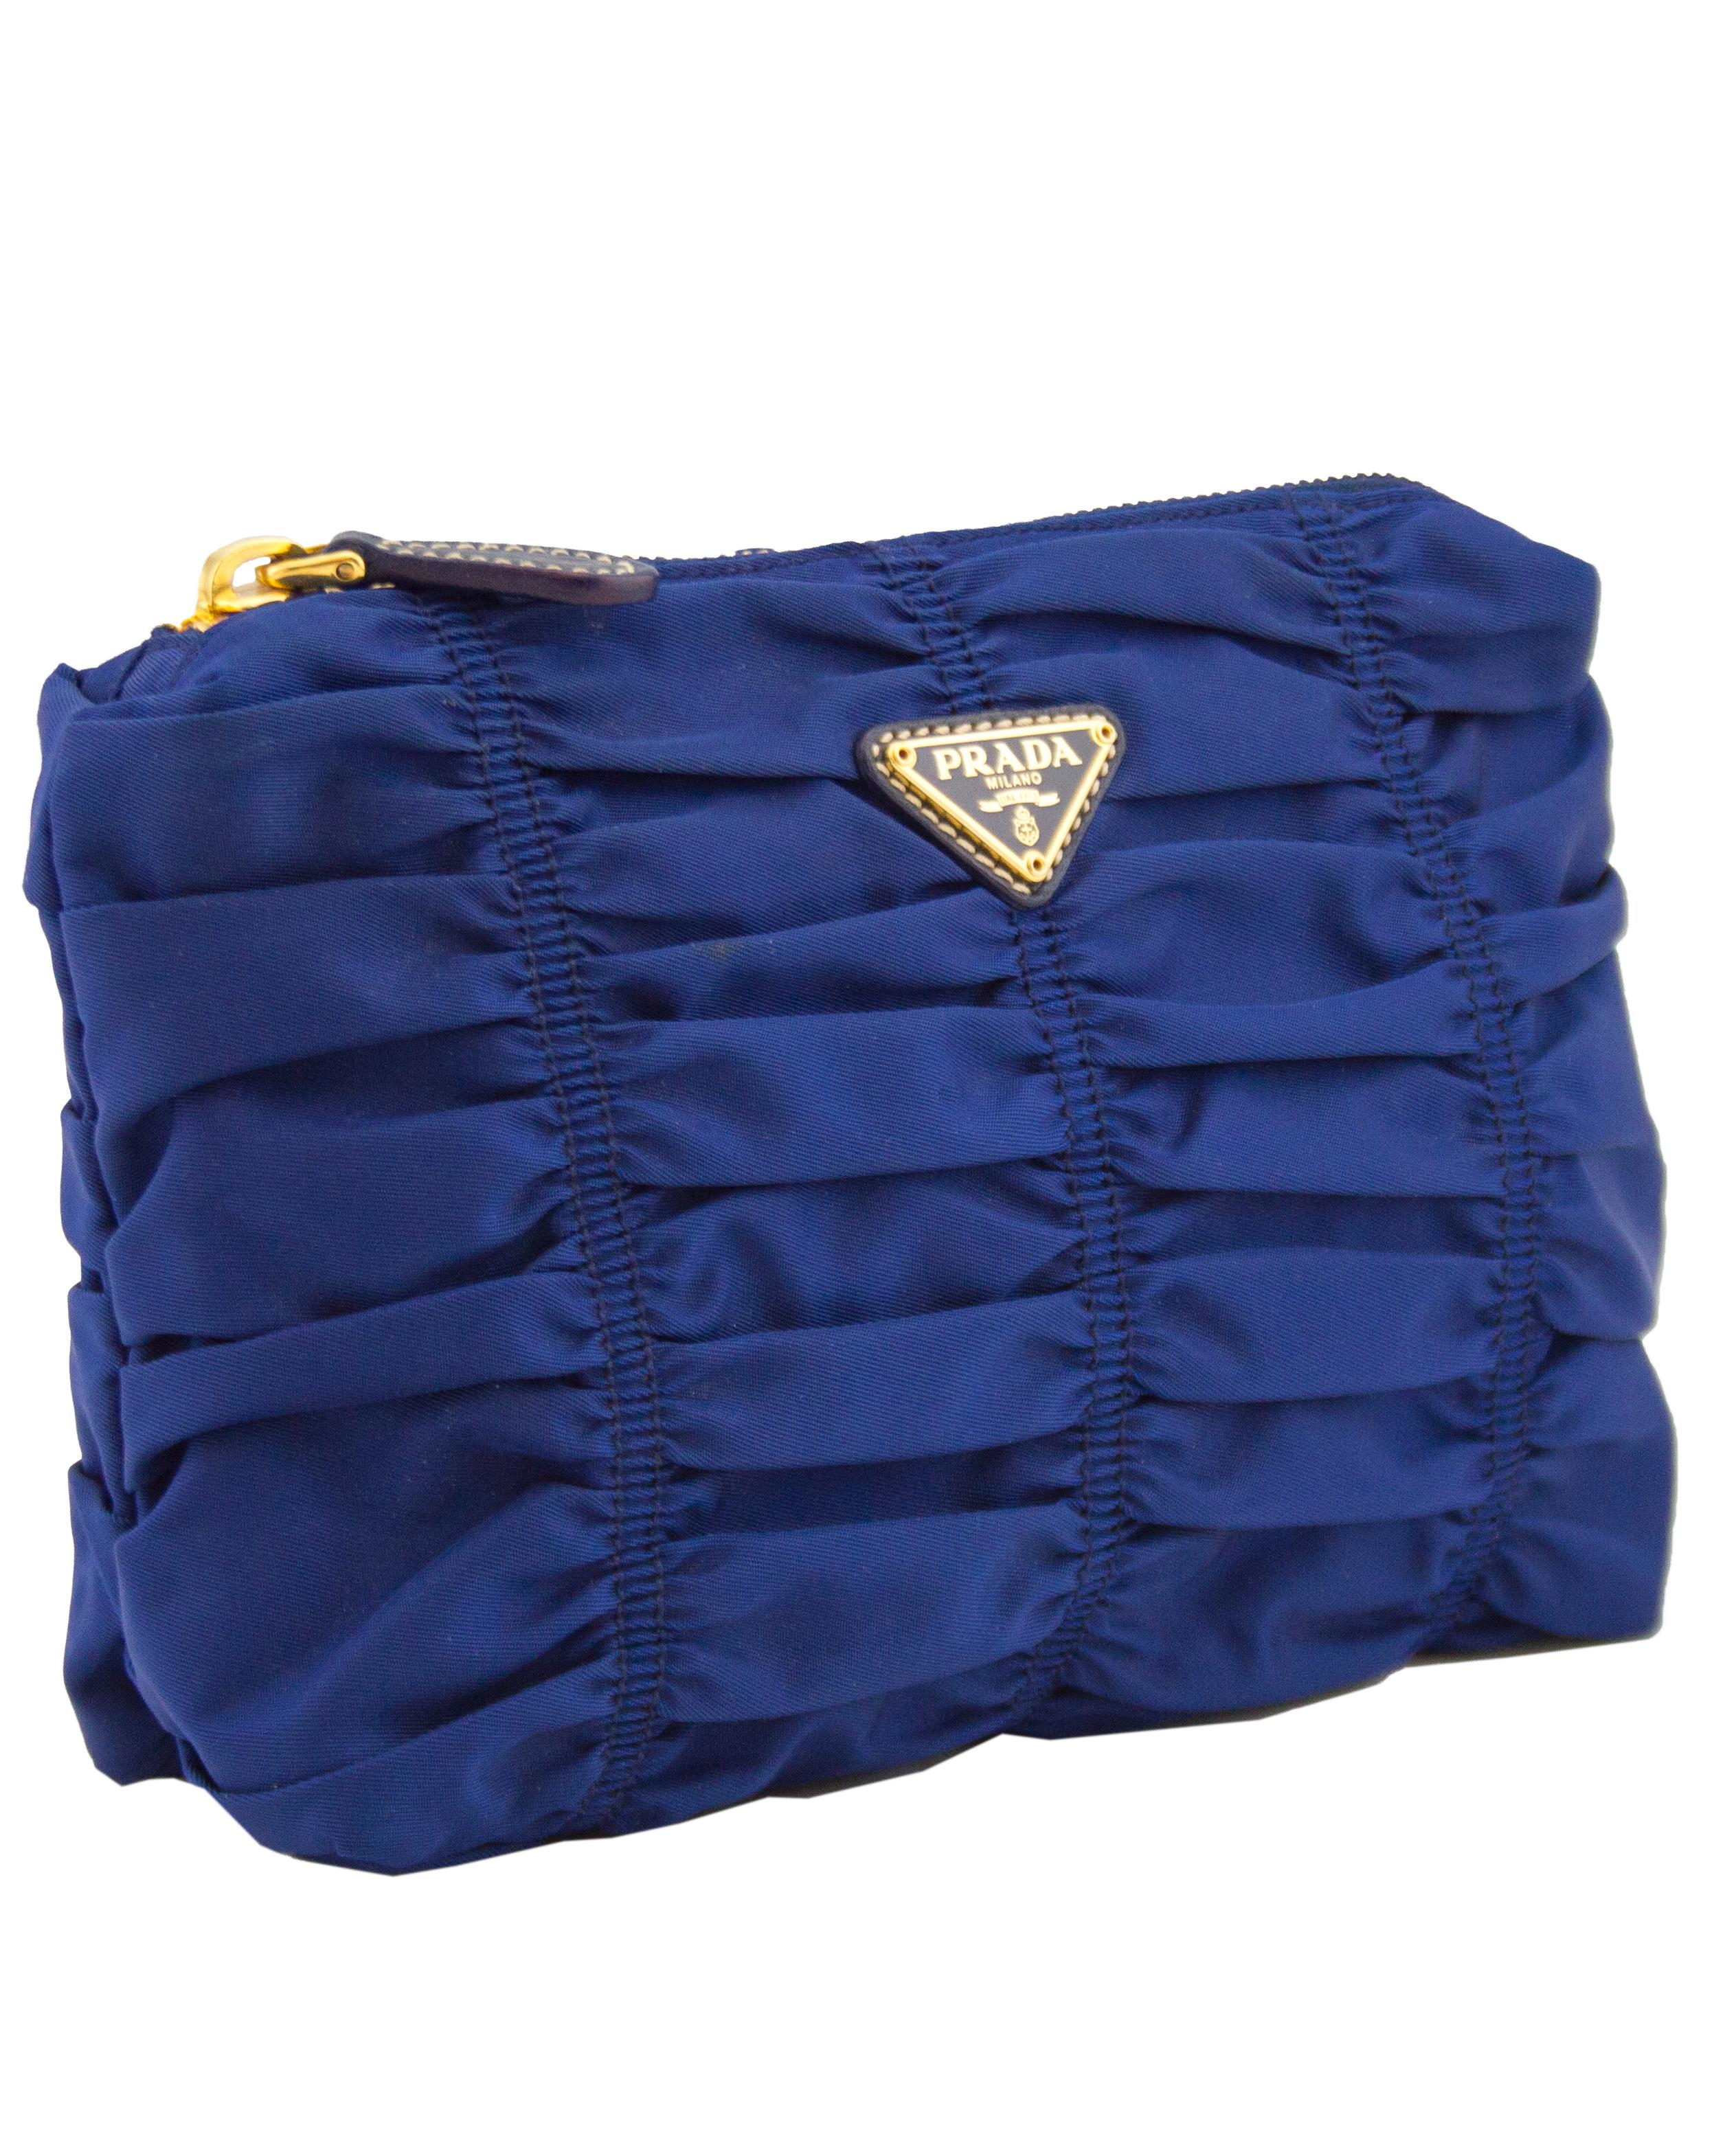 1990s Prada blue nylon clutch. Ruching throughout gives the bag texture. Iconic Prada triangle brand logo and goldtone zipper with blue leather pull tab. Black branded nylon lining. Works wonderfully as a clutch for a cocktail party, and great for